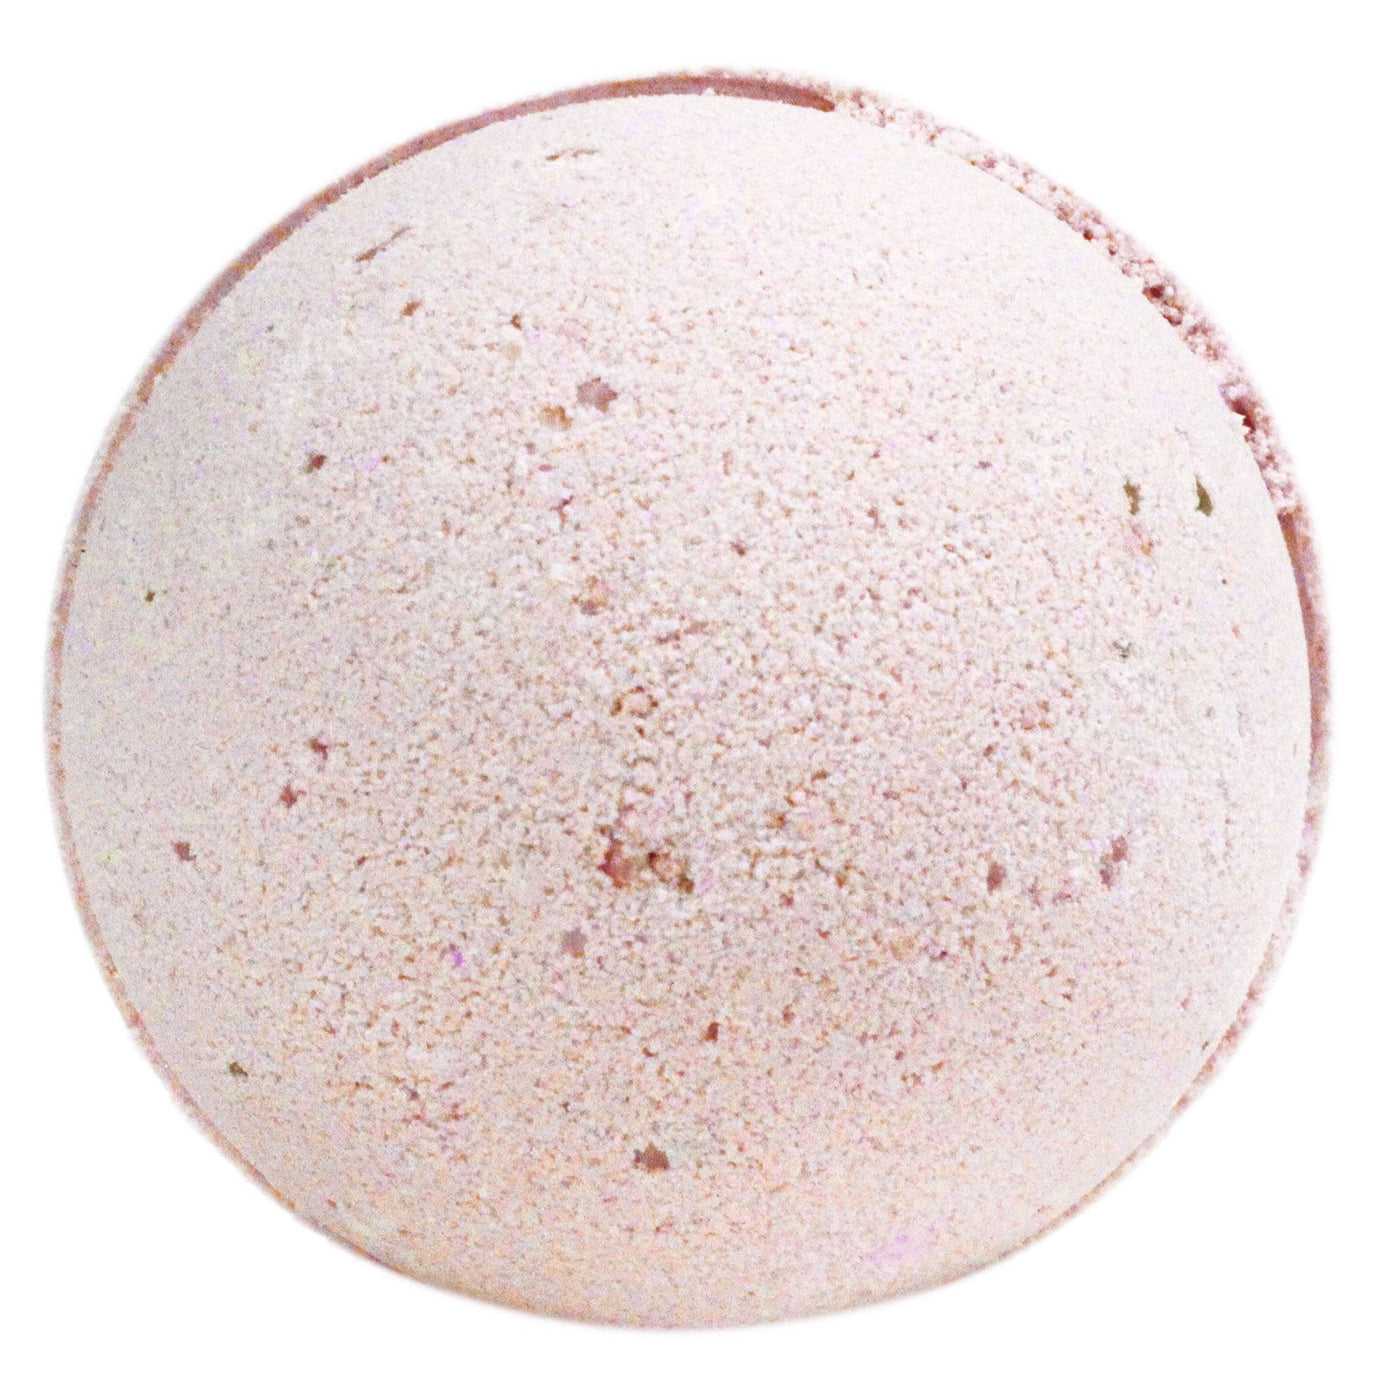 Large Shea Butter Oriental Musk Bath Bomb With Floral Fragrance.